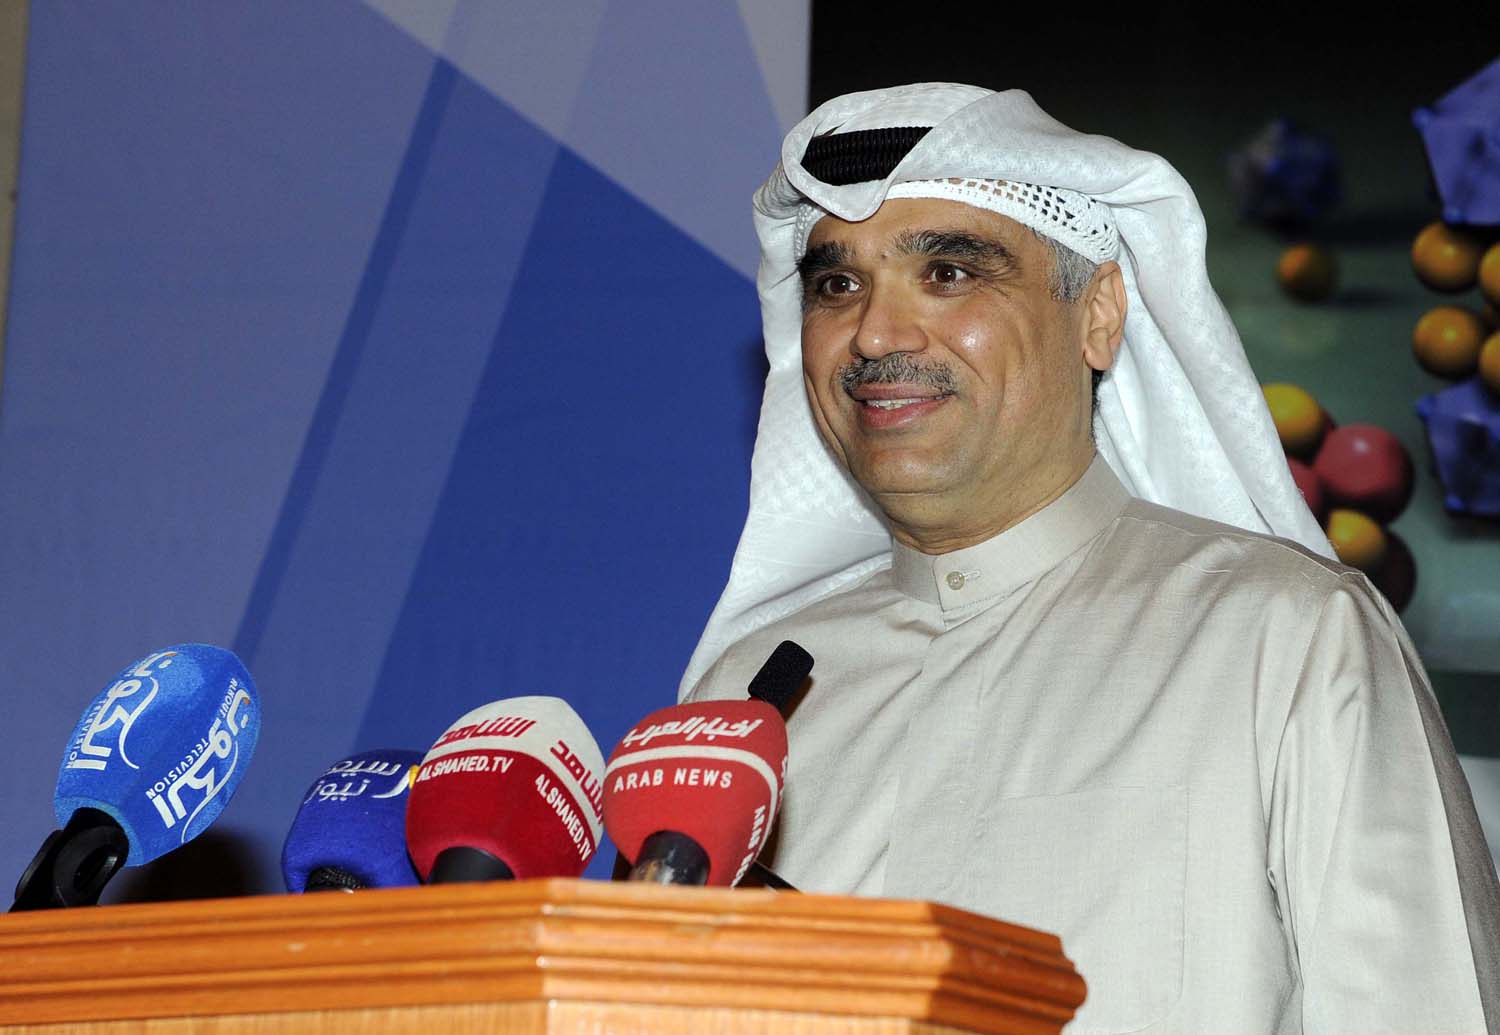 Acting Director General of Central Agency for Information Technology Qusai Al-Shatti